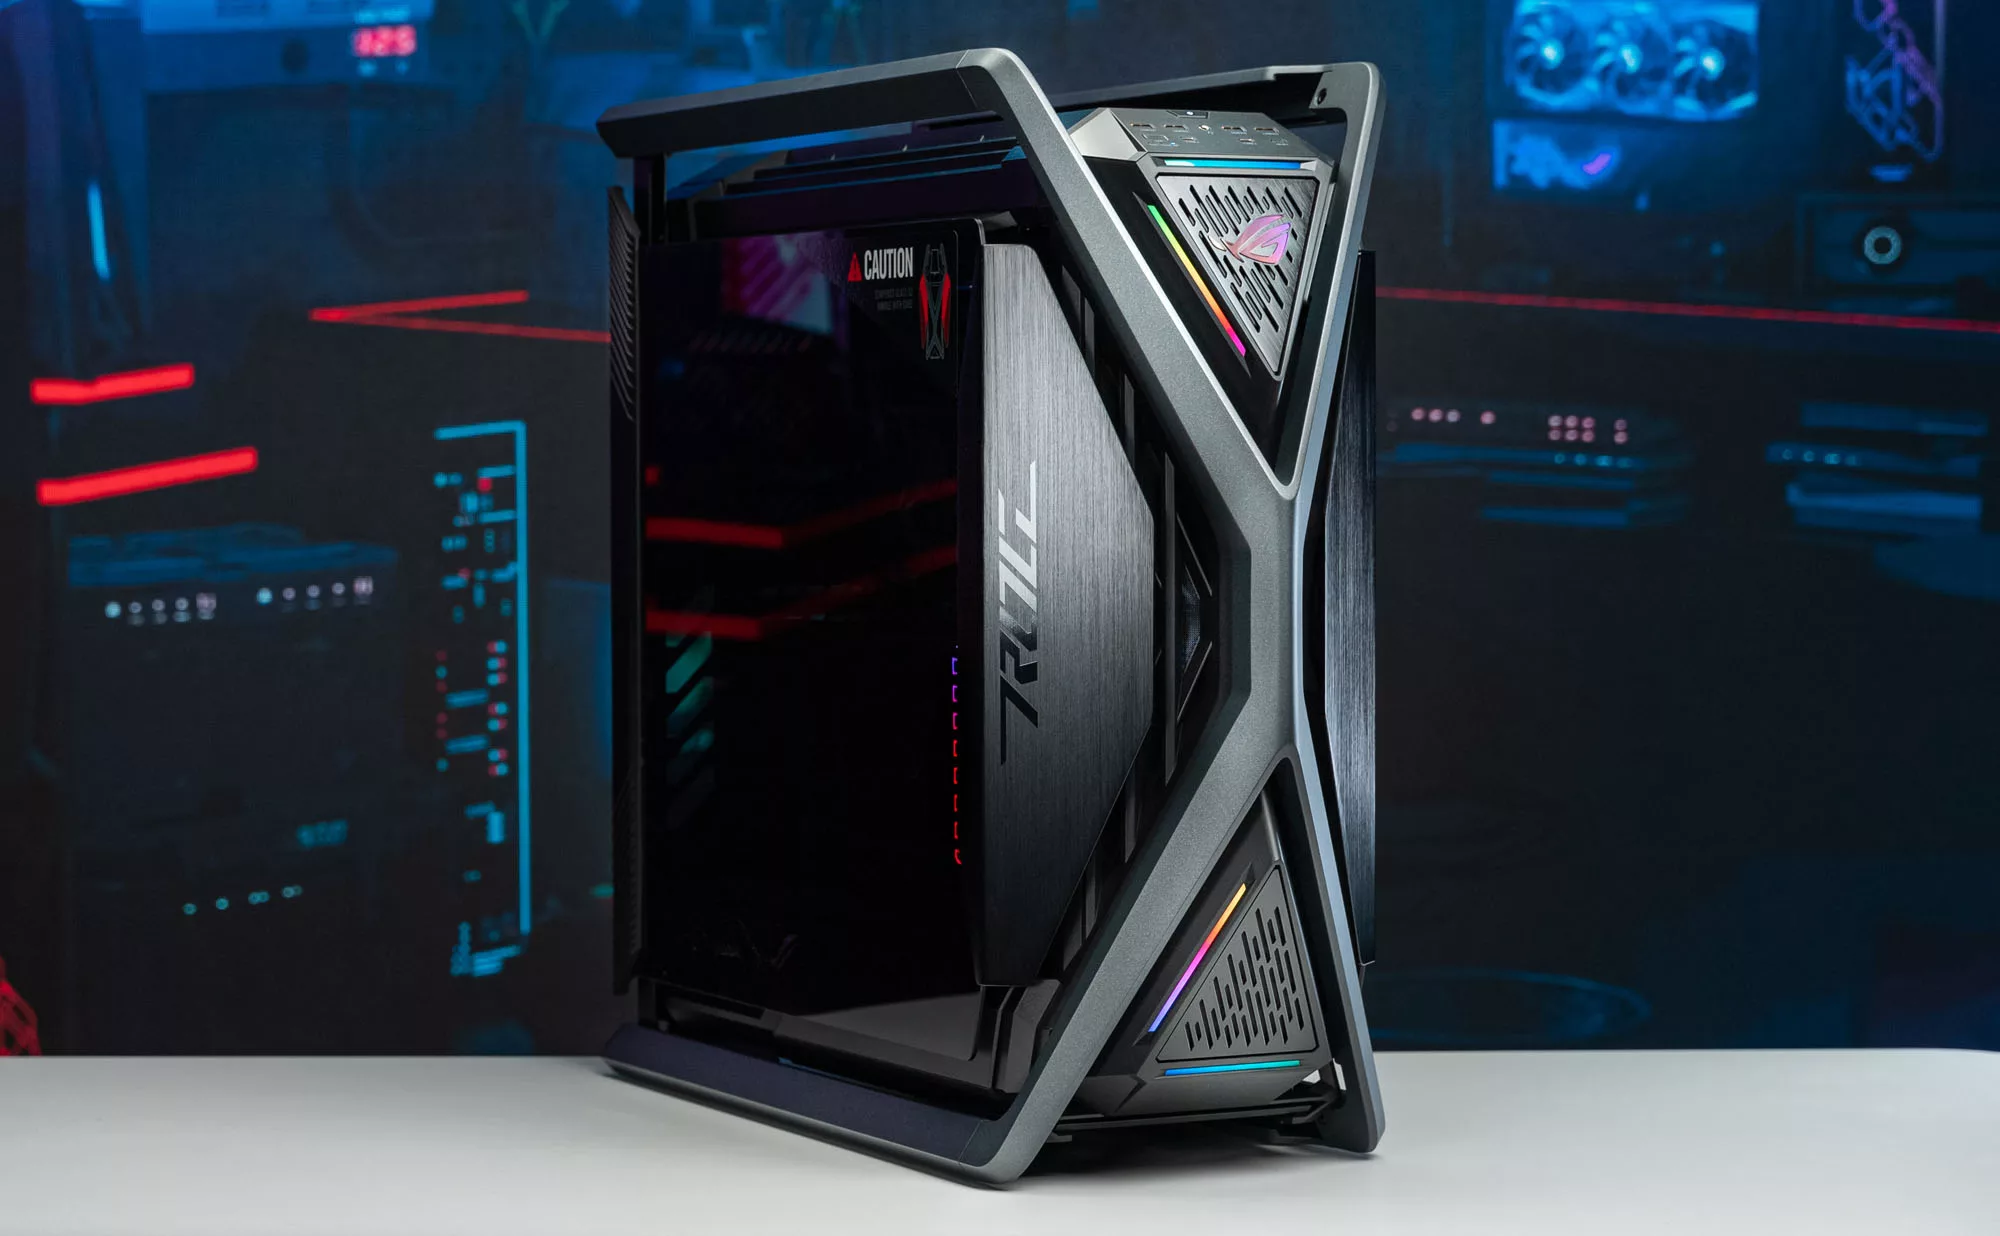 A front view of the ROG Hyperion case with its RGB logo illuminated.